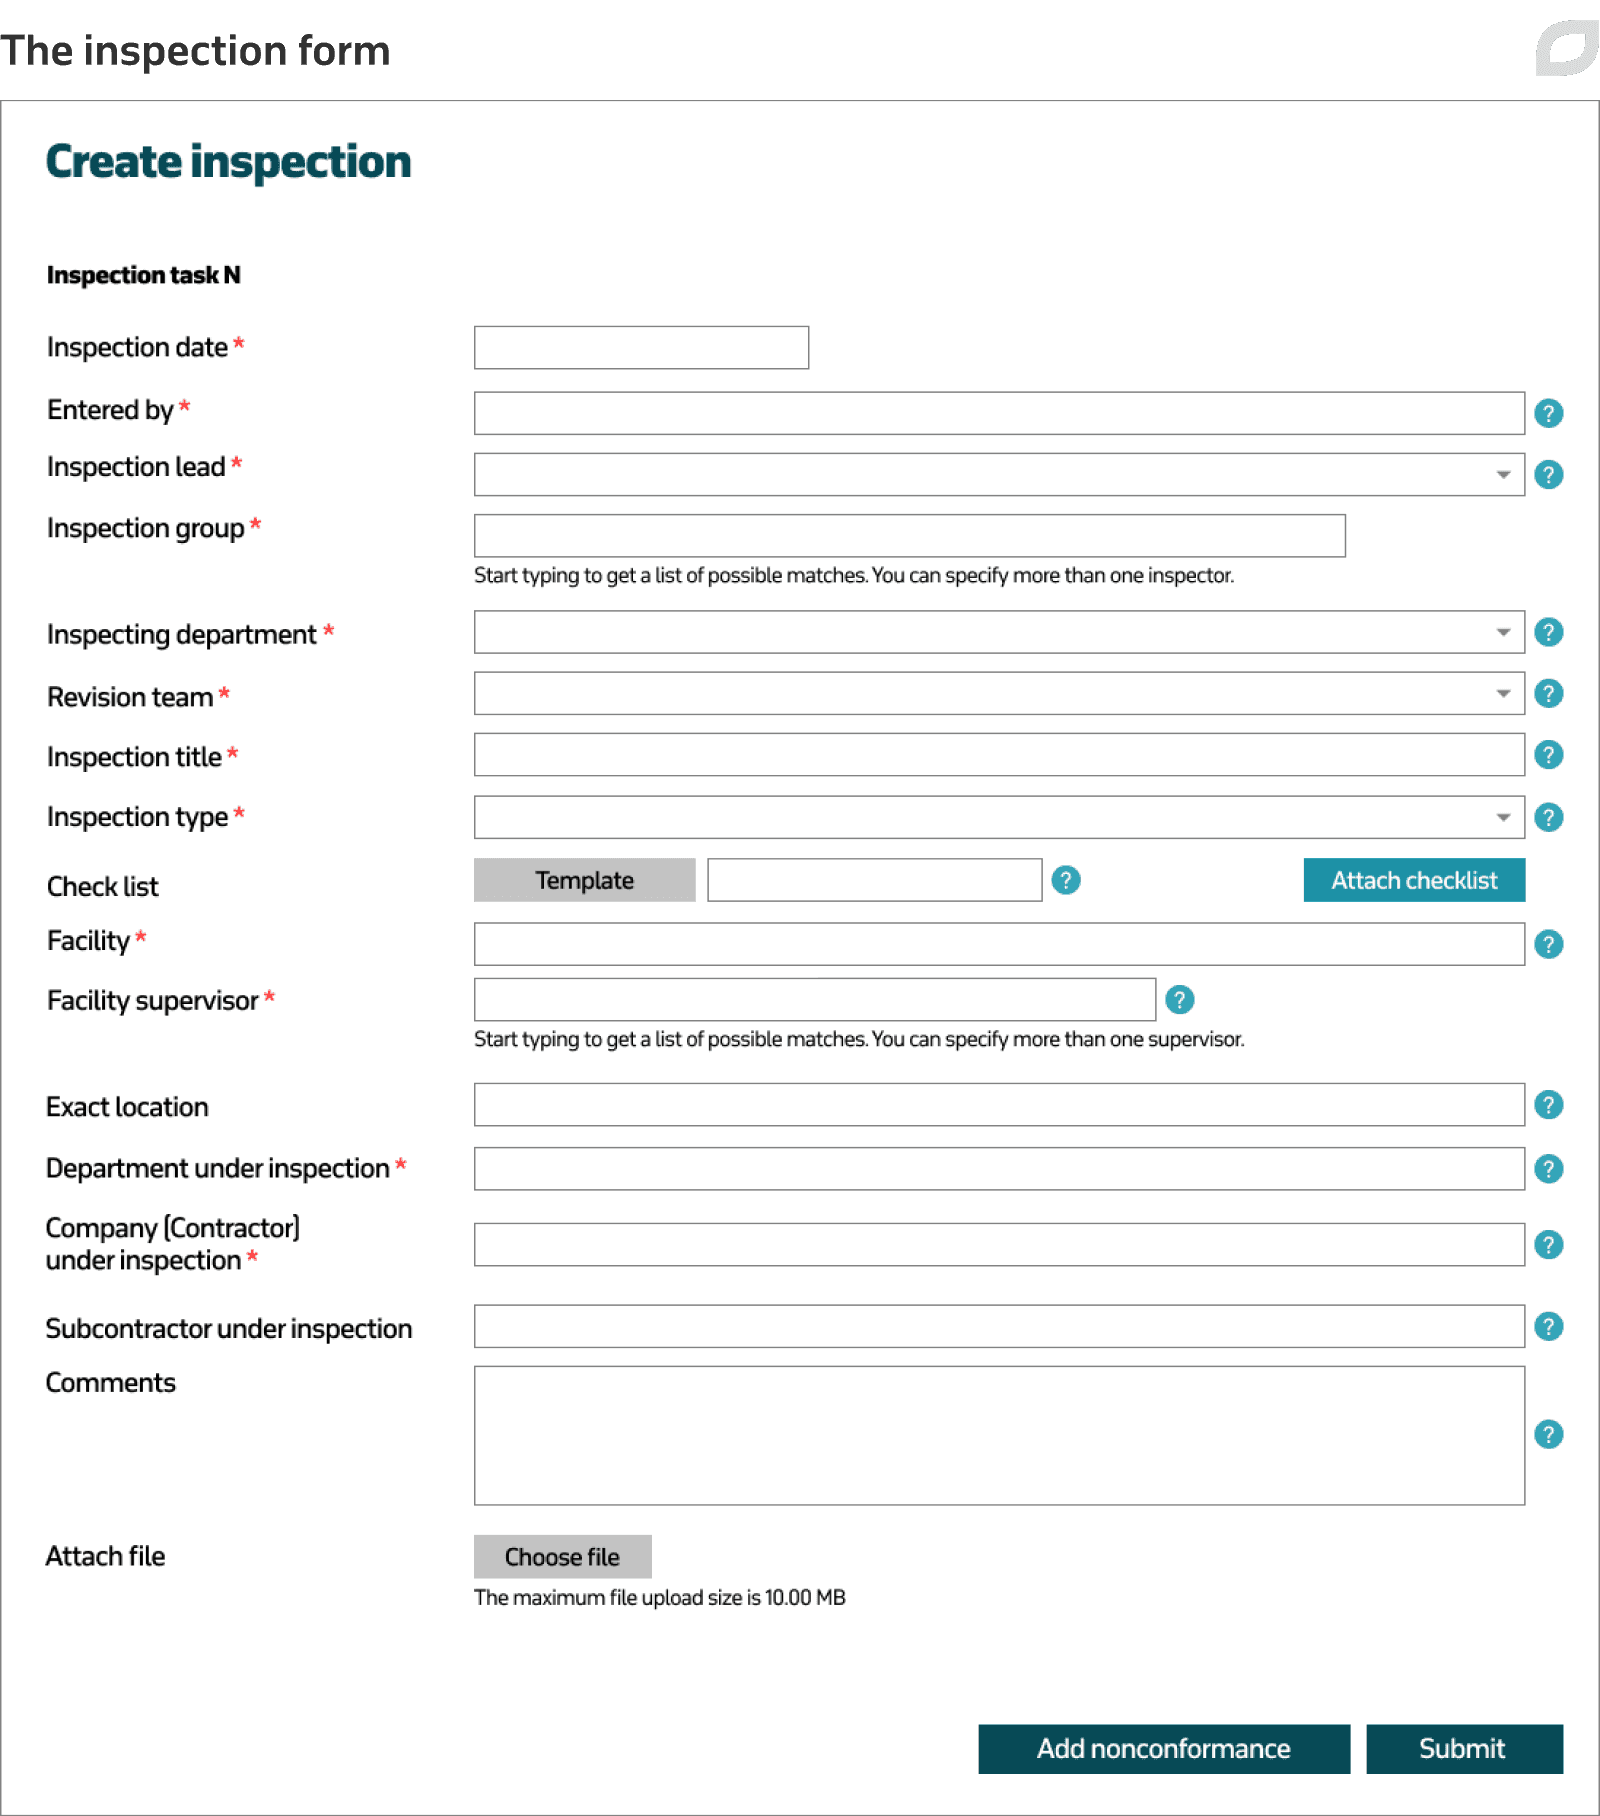 The inspection form